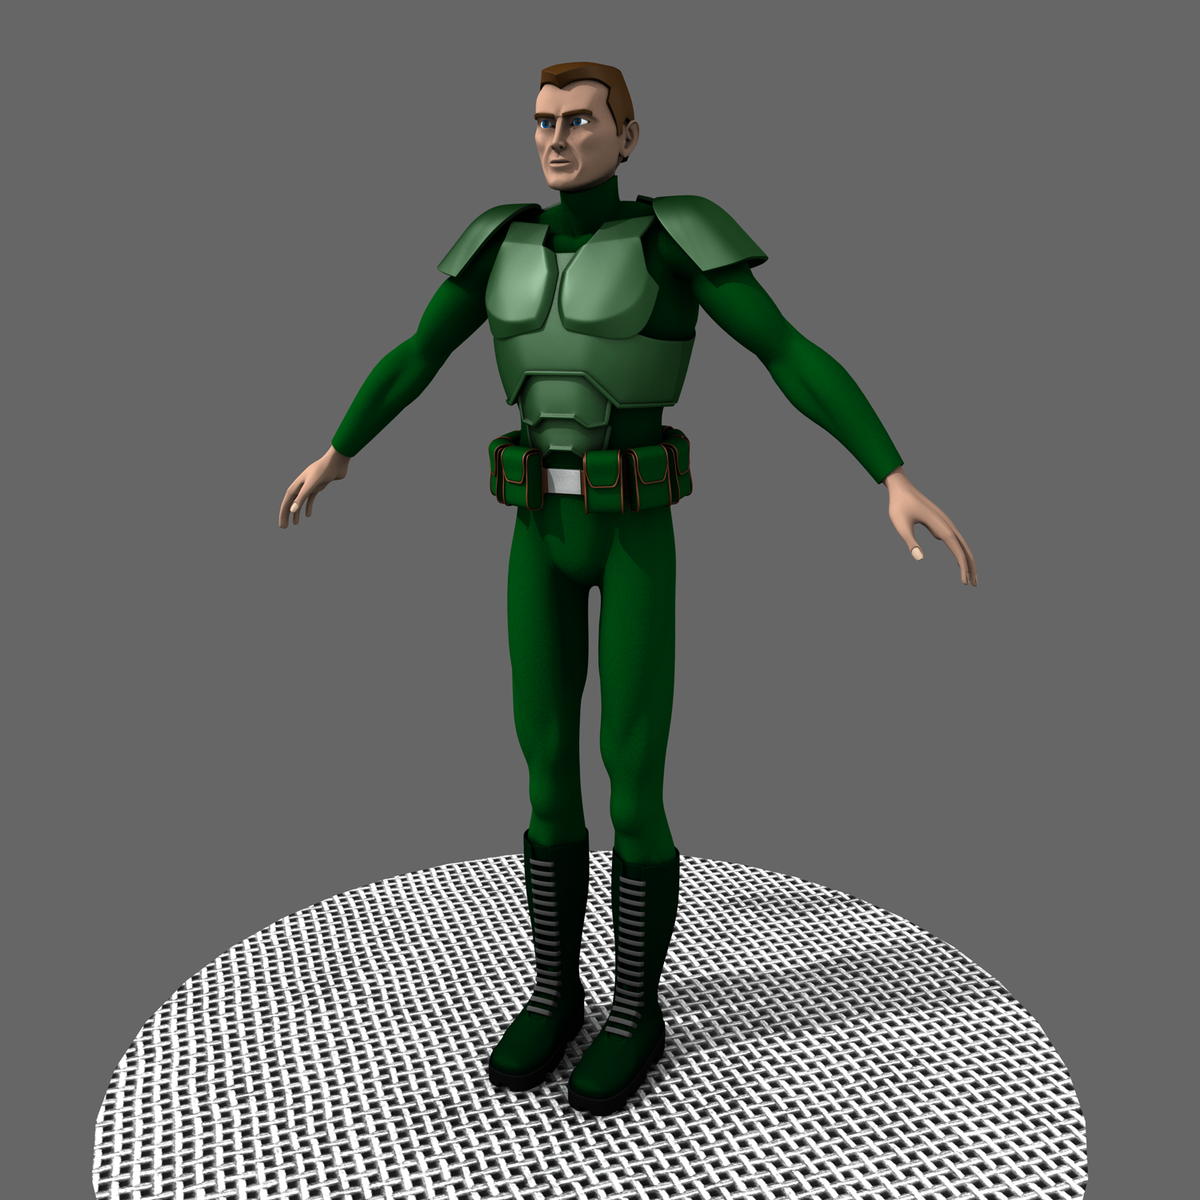 DoomGuy_WIP_0064.png.18687cce72a0be20c202ab3fc391ba53.png